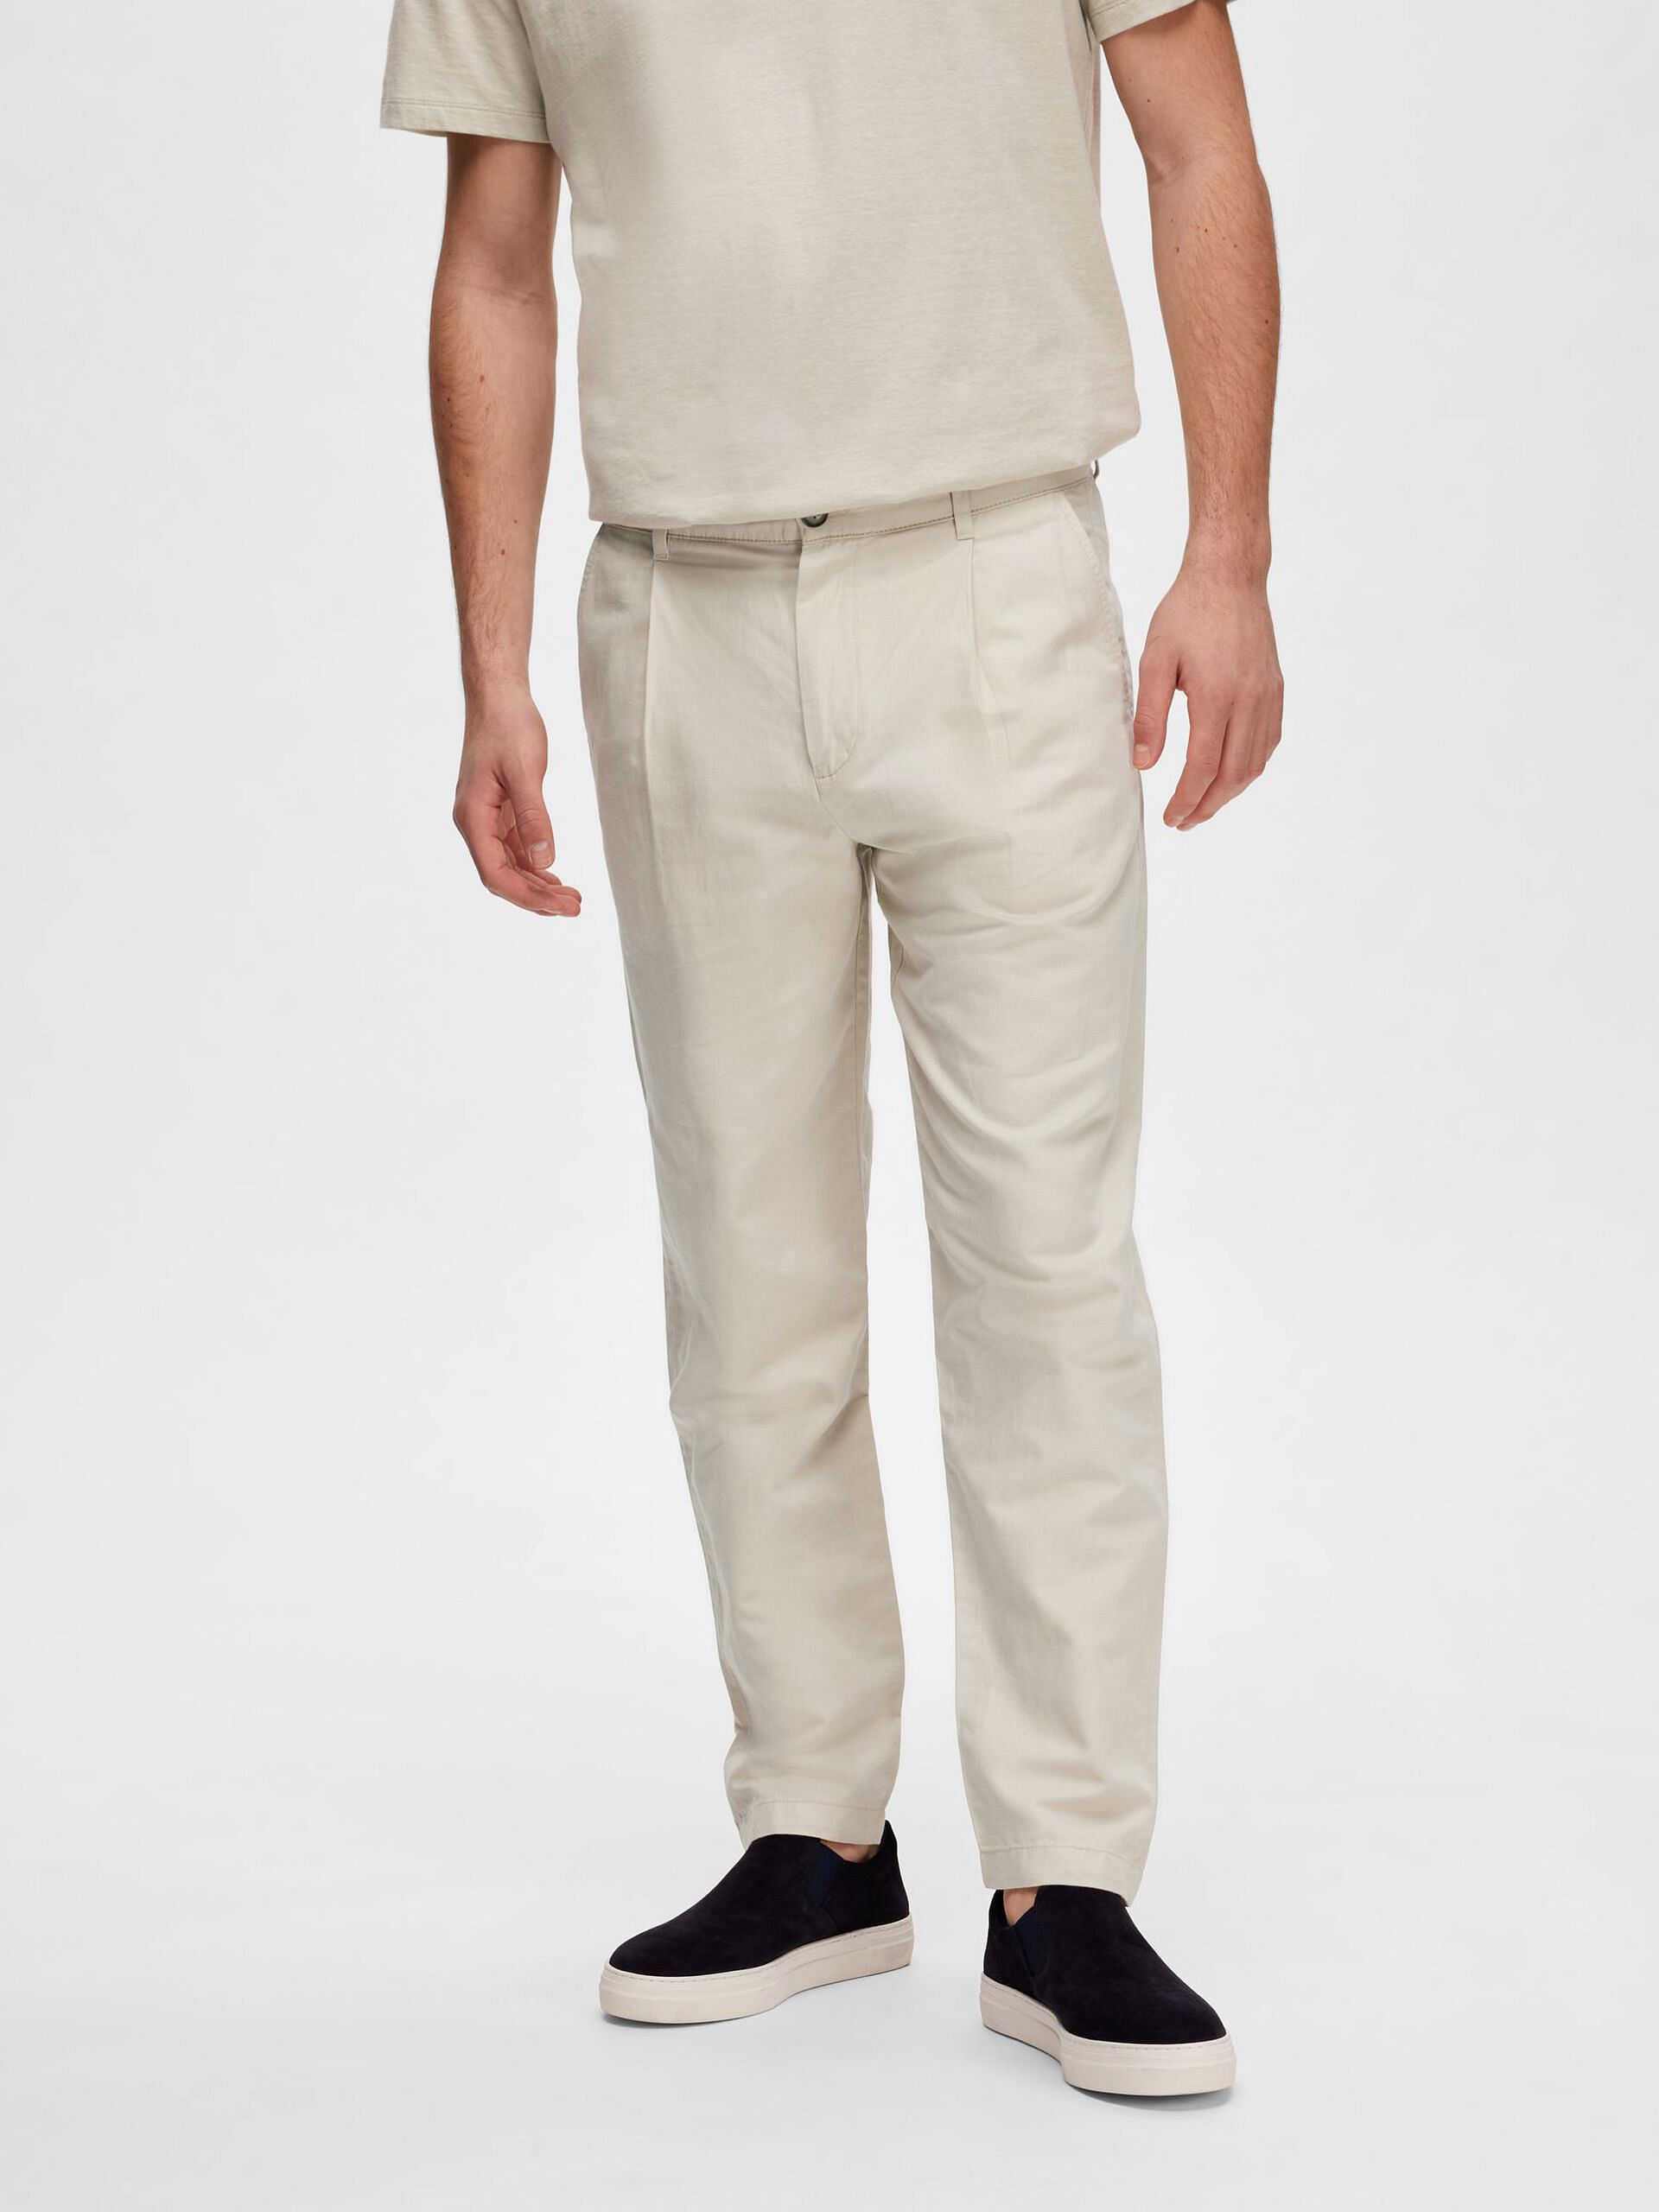 Gray Slim Fit Linen Pants for Men by GentWithcom